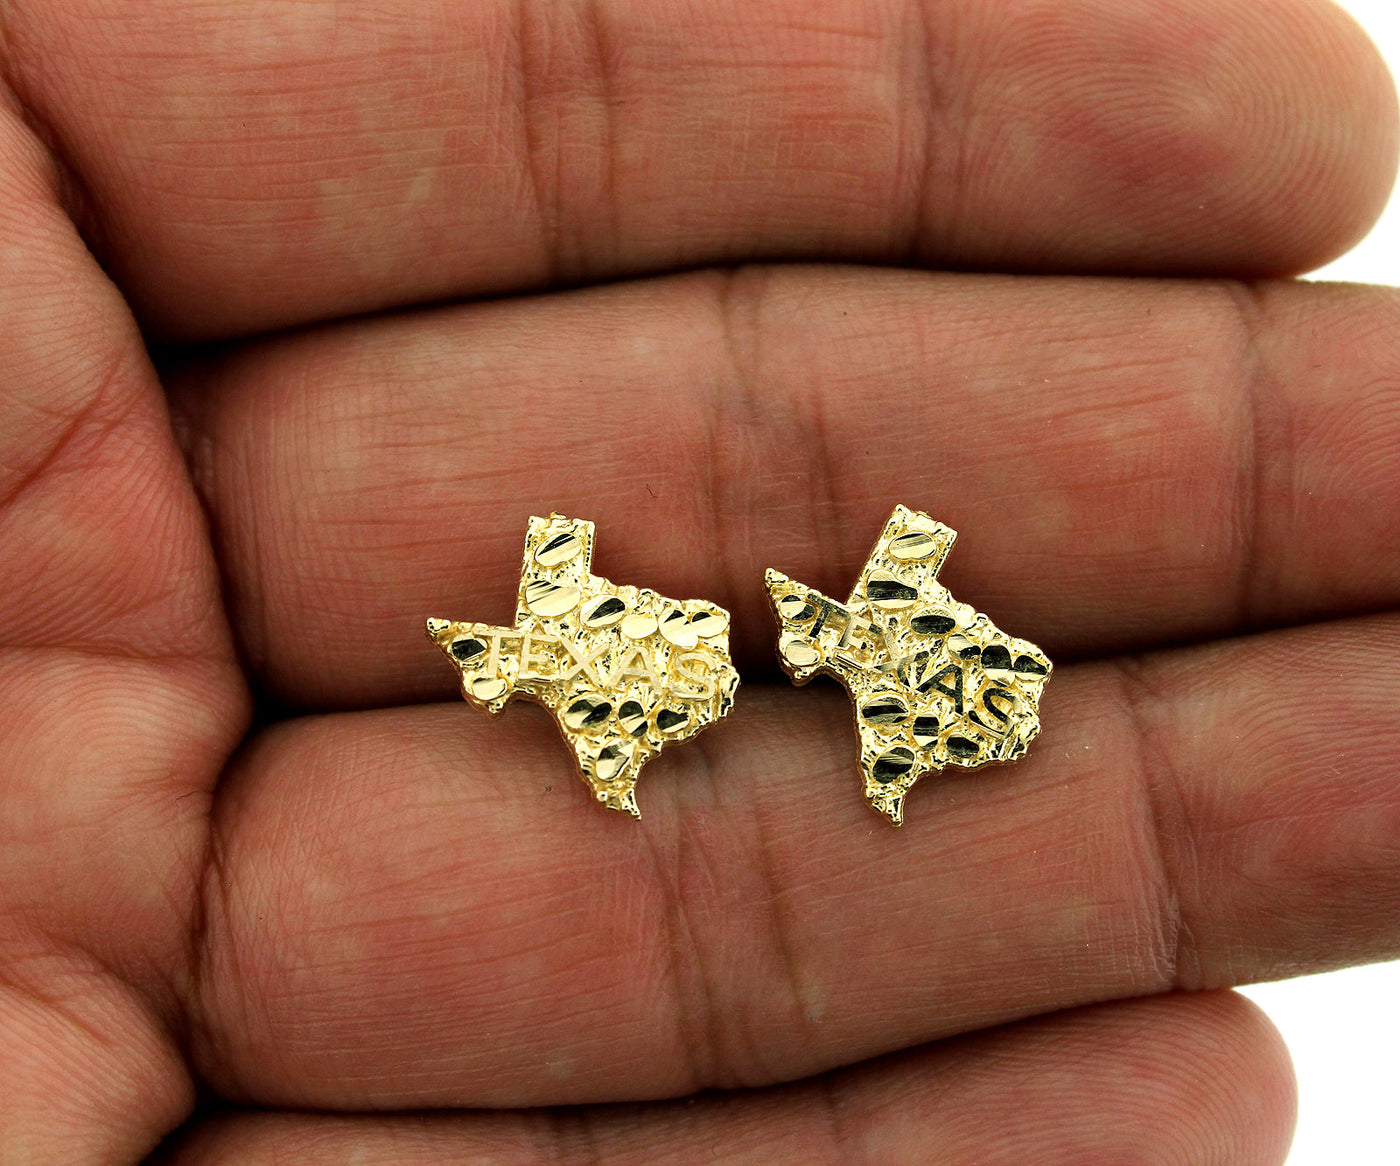 10K Solid Yellow Gold Diamond Cut Large Texas Map Nugget Stud Earrings